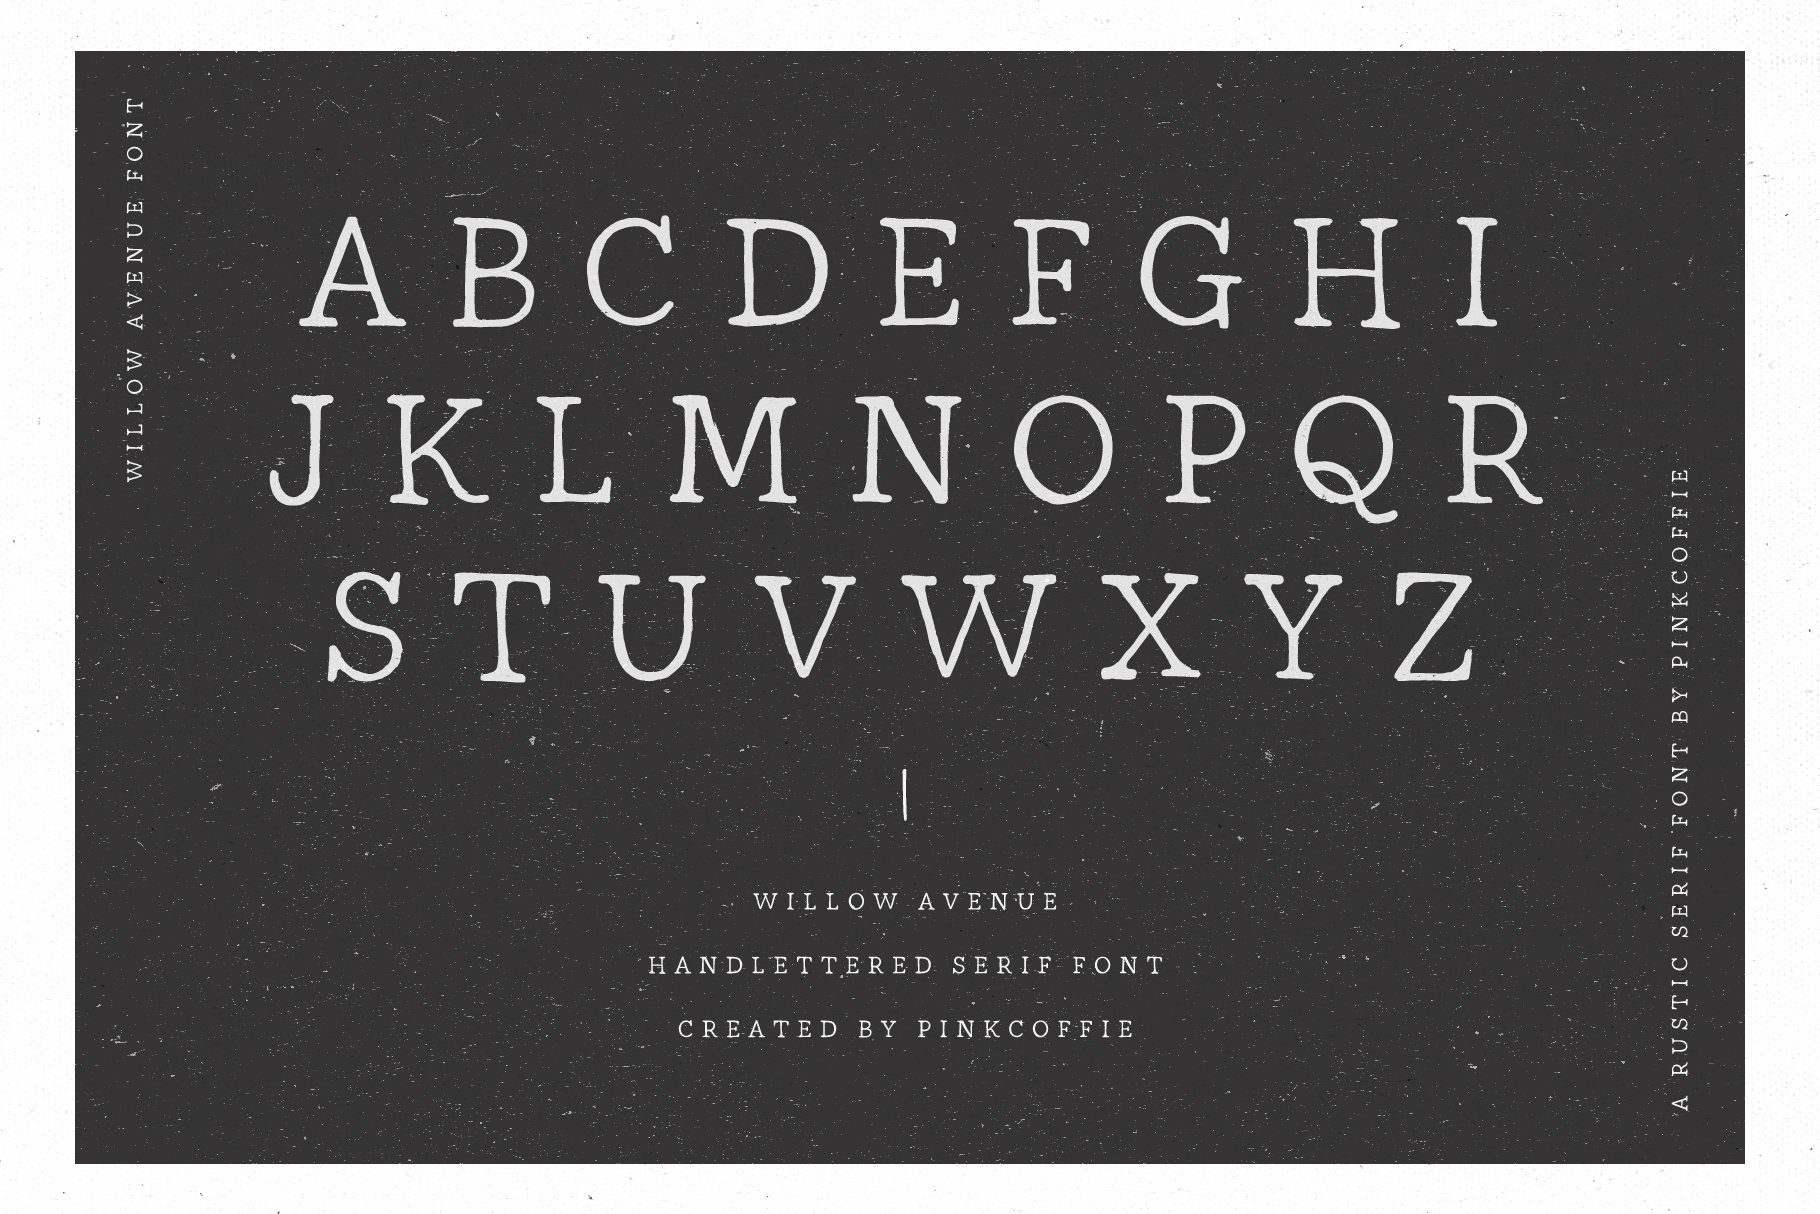 5 willow avenue rustic handlettered serif uppercase 177